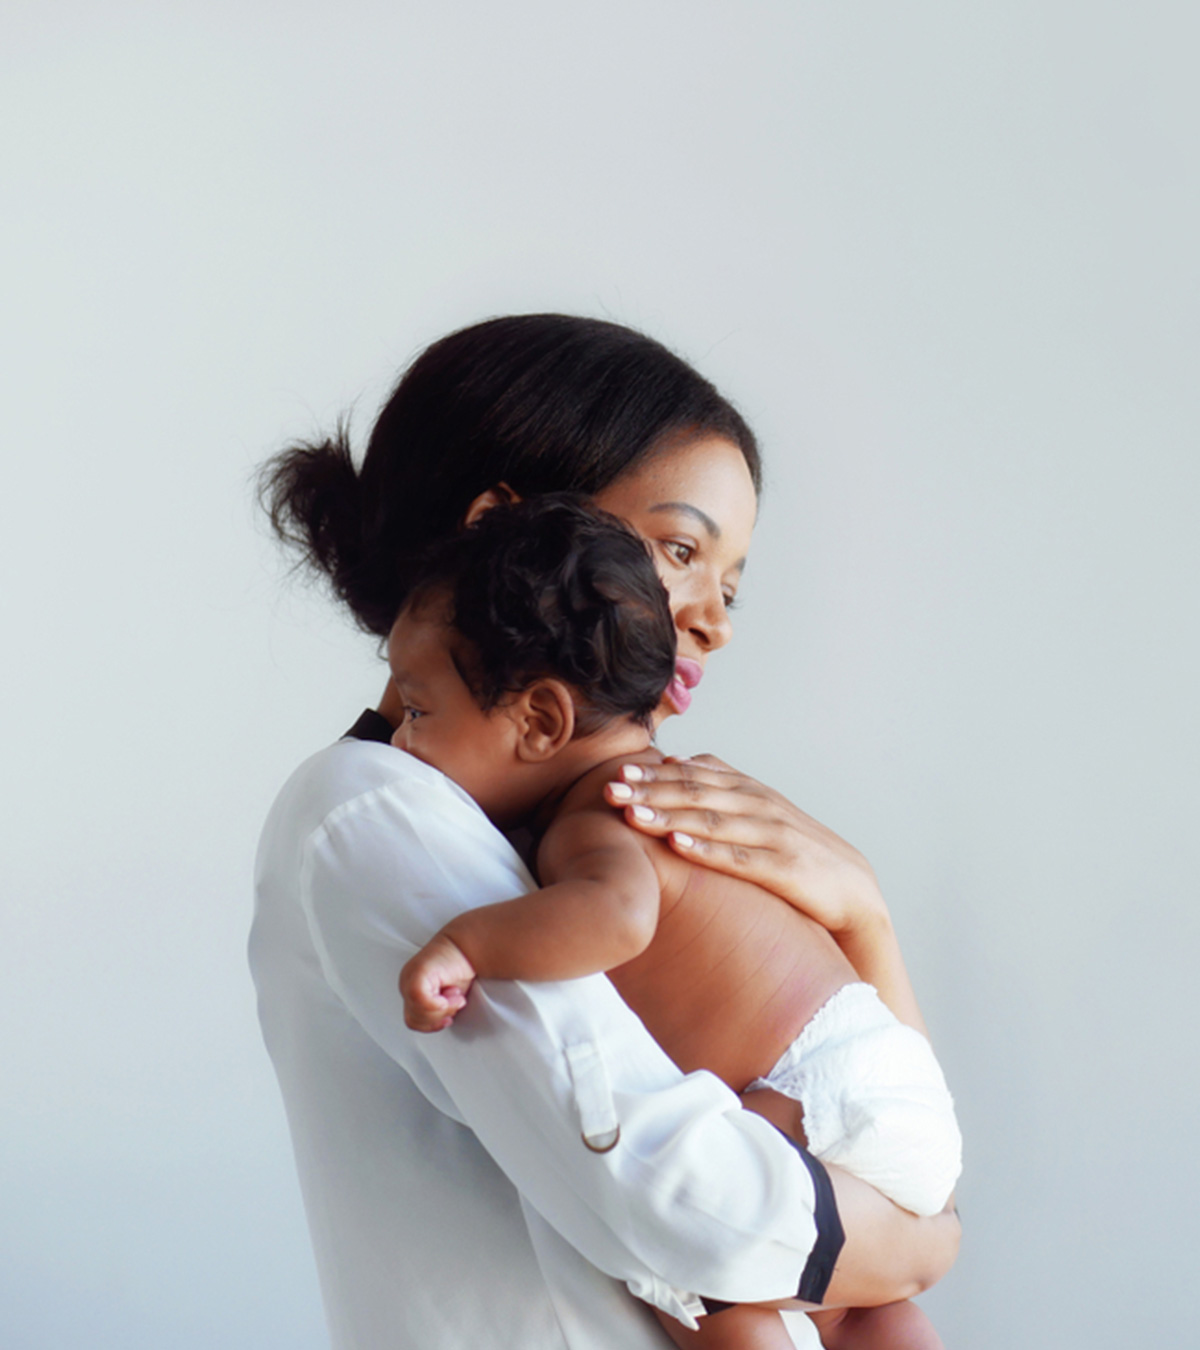 Taking Antidepressants Made Me A Better Mom1